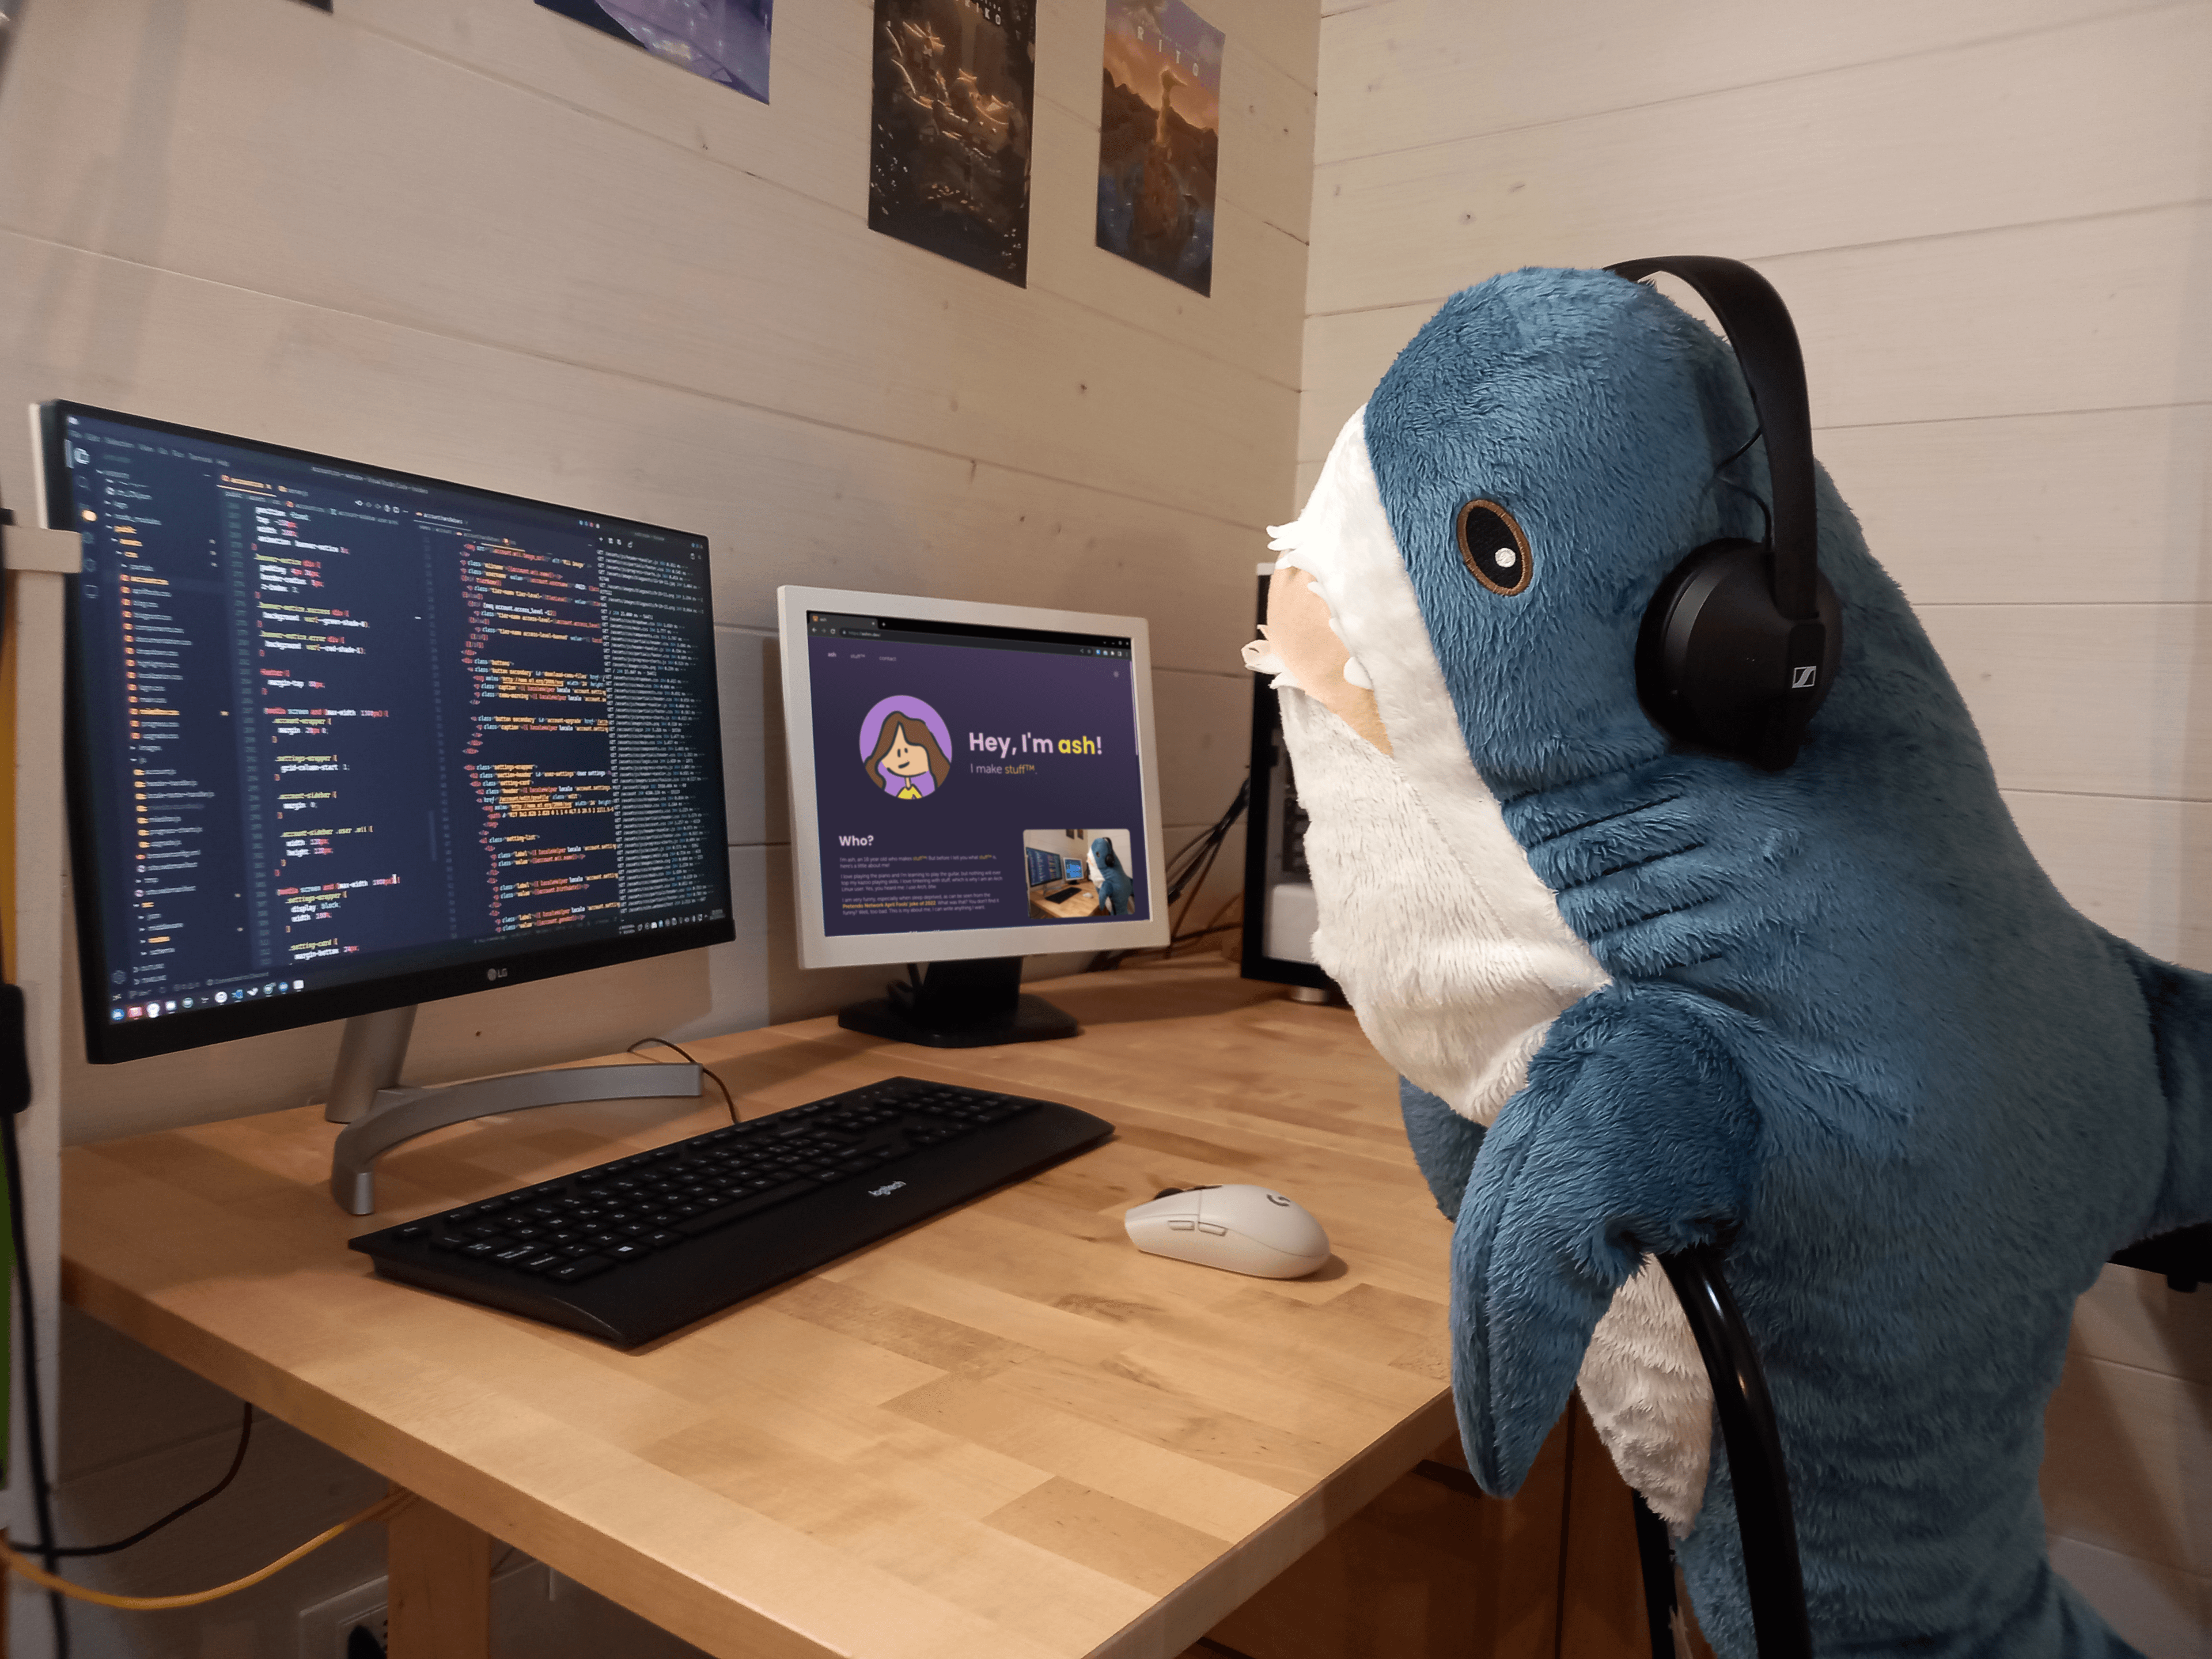 A picture of a Blåhaj (a stuffed shark plush from IKEA) wearing headphones and sitting at a desk. The shark appears to be working on some code on their main monitor, and they have this website open on their secondary monitor